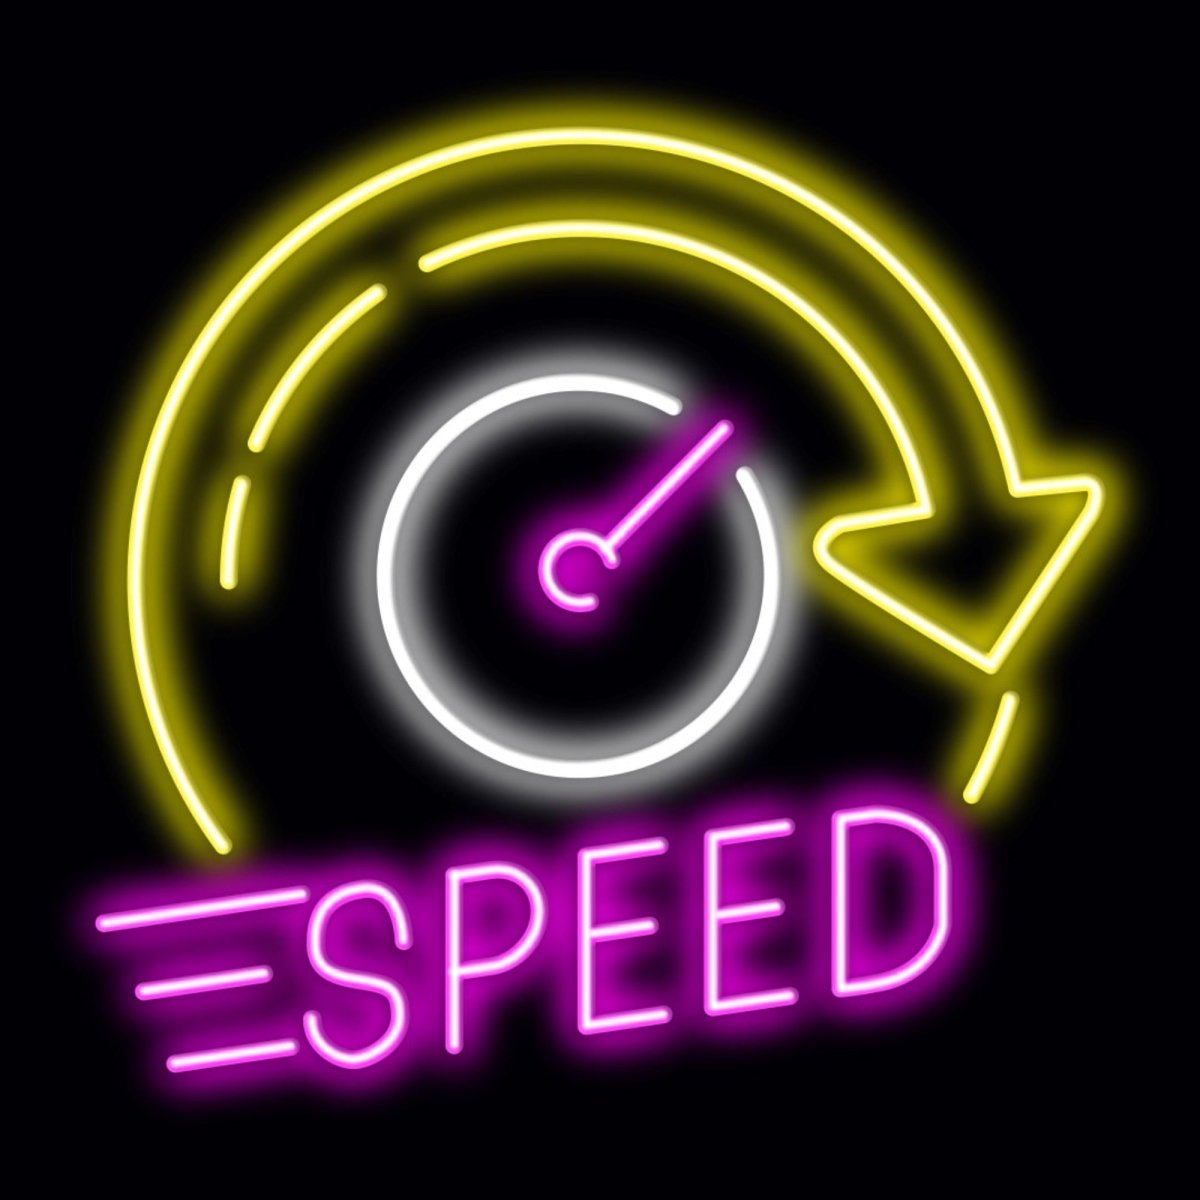 Personalised LED Neon Sign SPEED 1 - madaboutneon